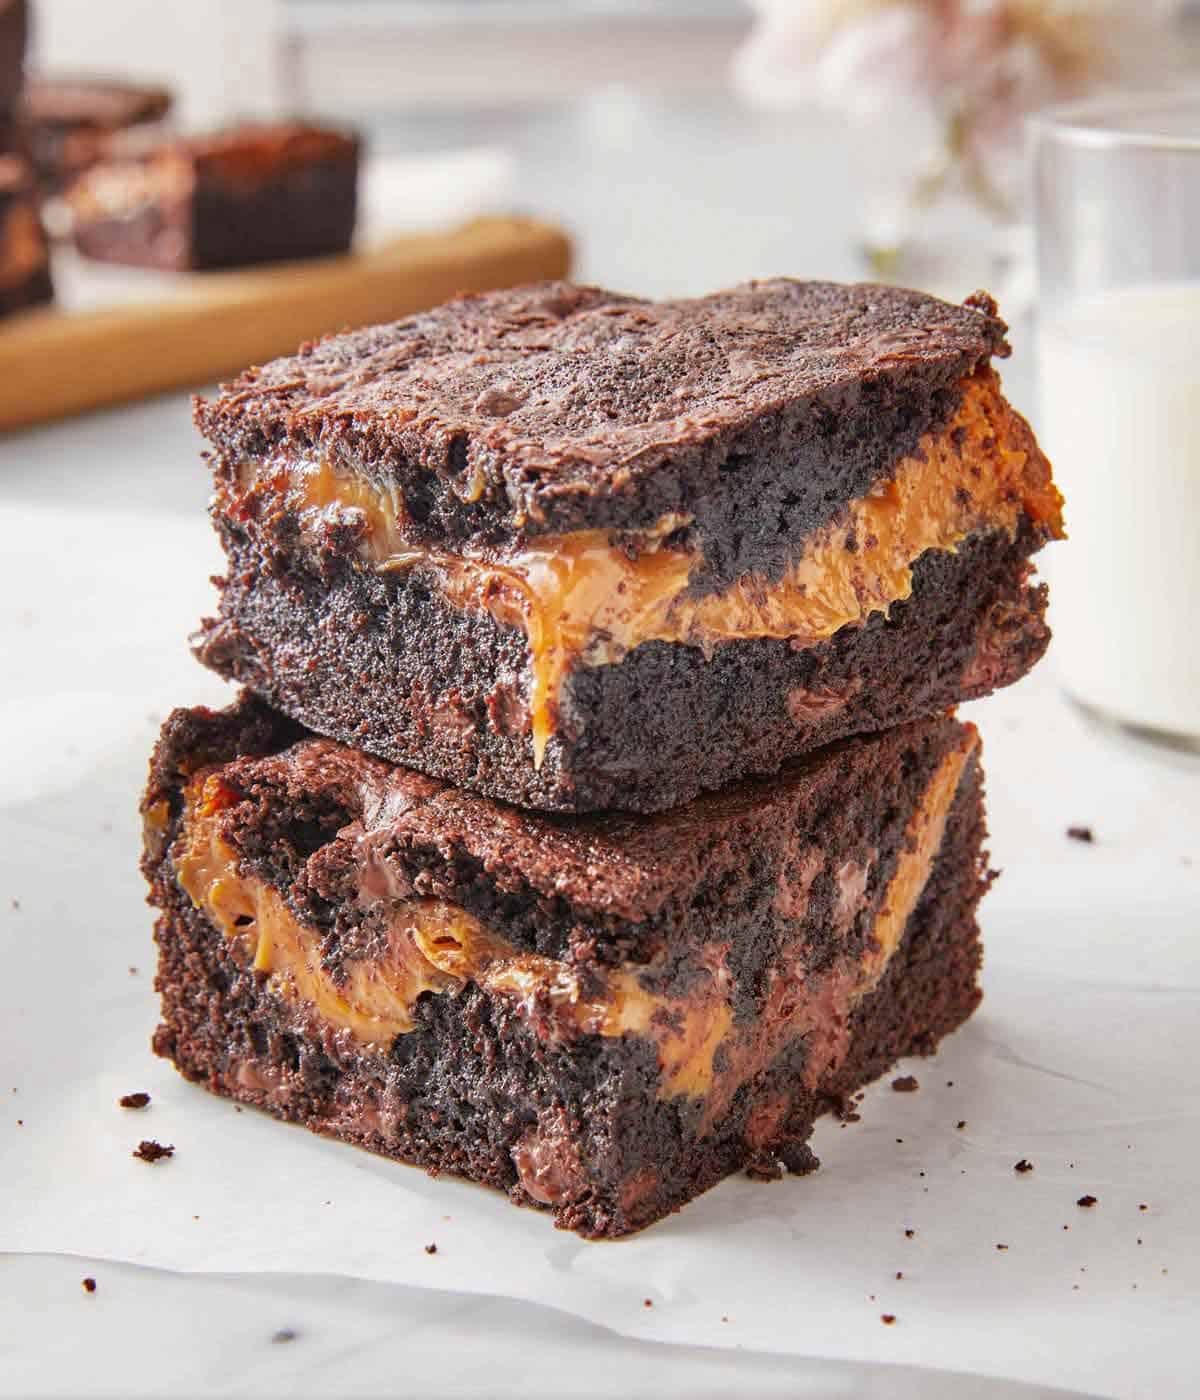 Two caramel brownies stacked on top of each other with a glass of milk in the background.